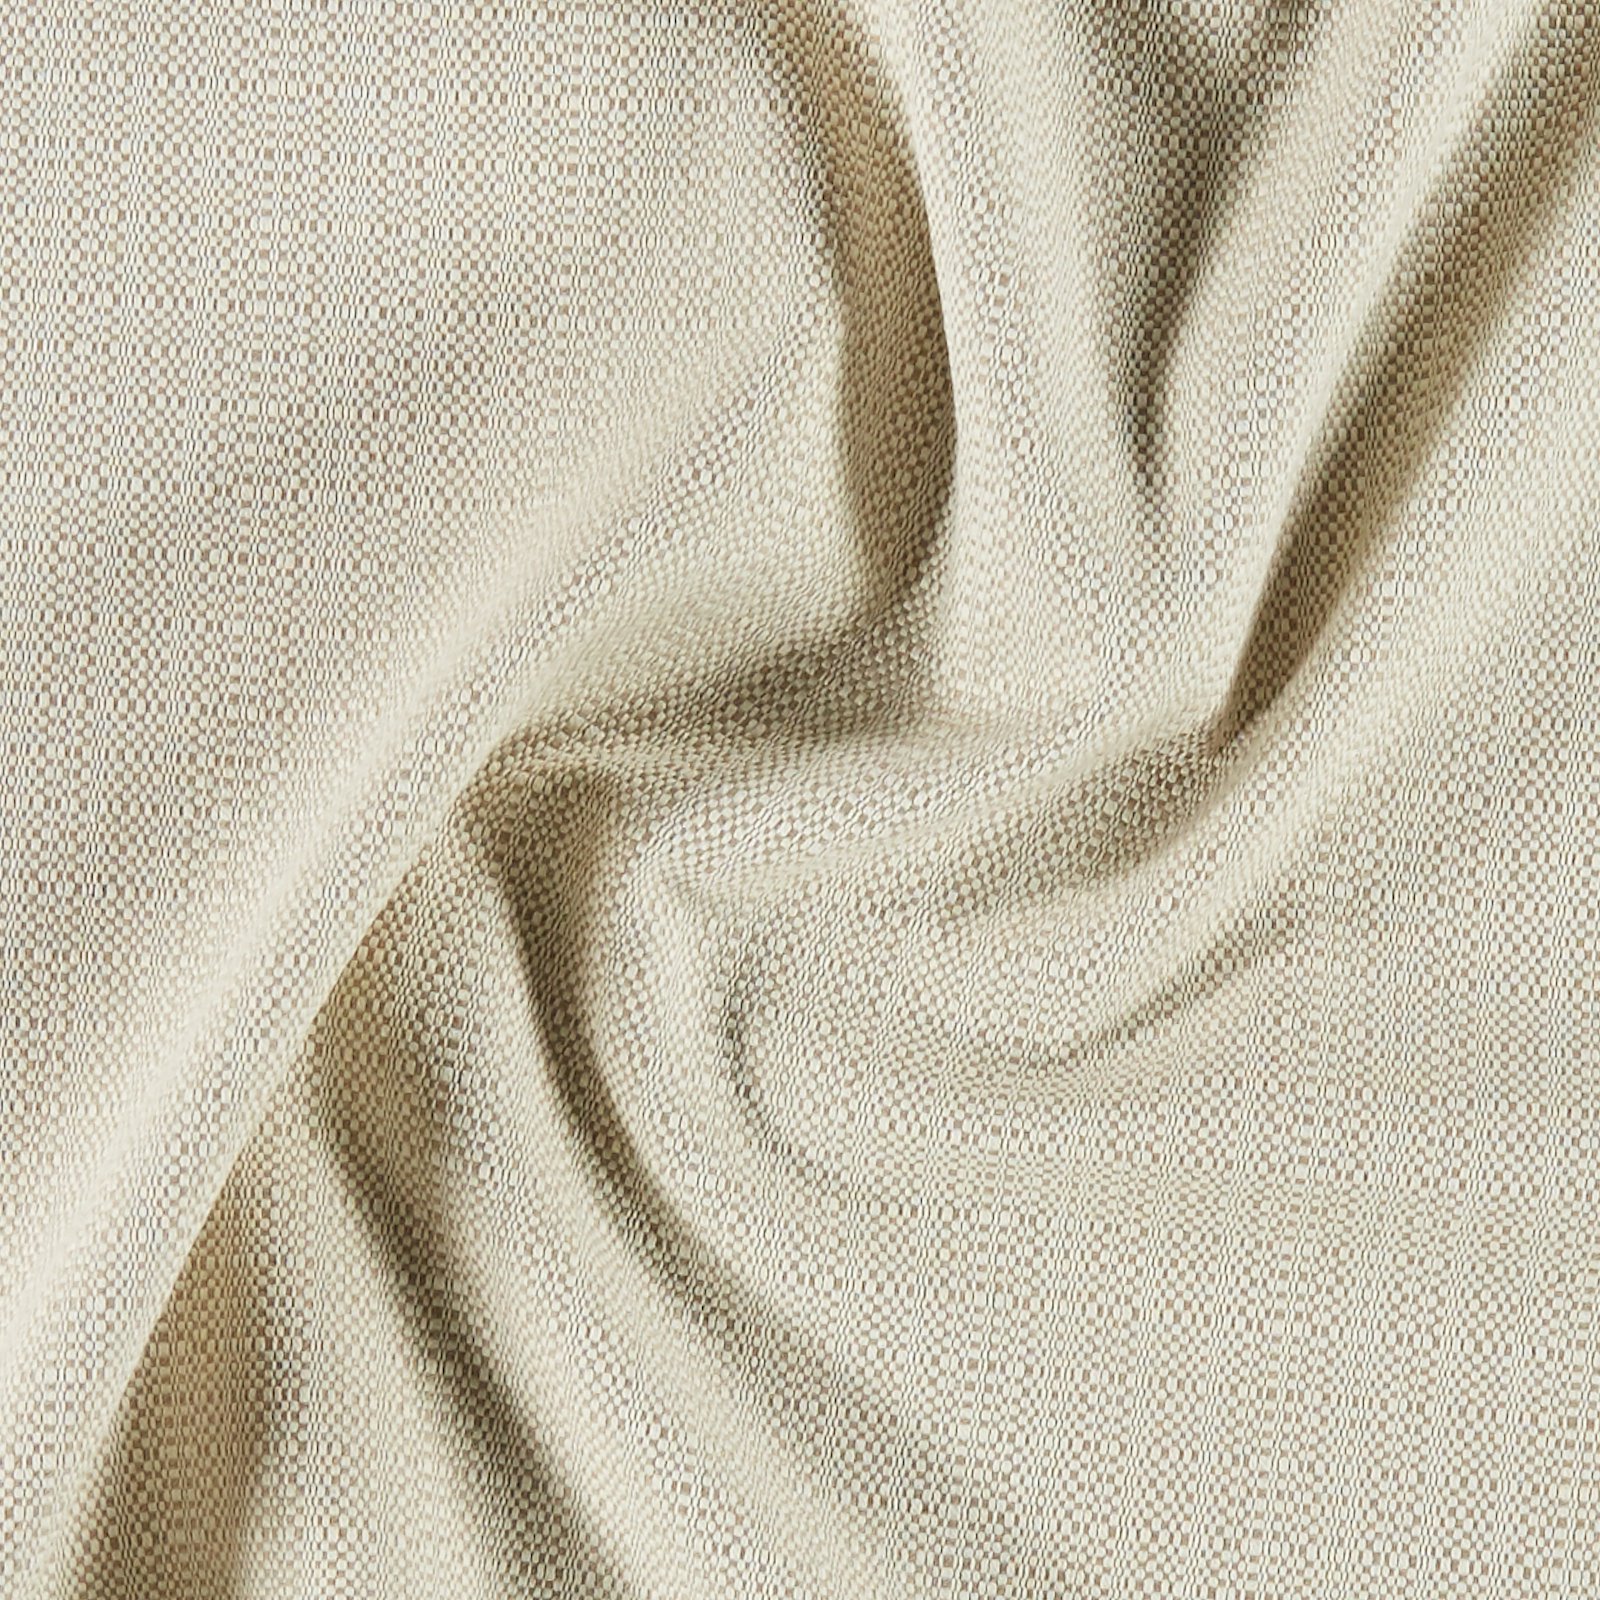 Recycled jacquard offwhite/sand pattern 780943_pack